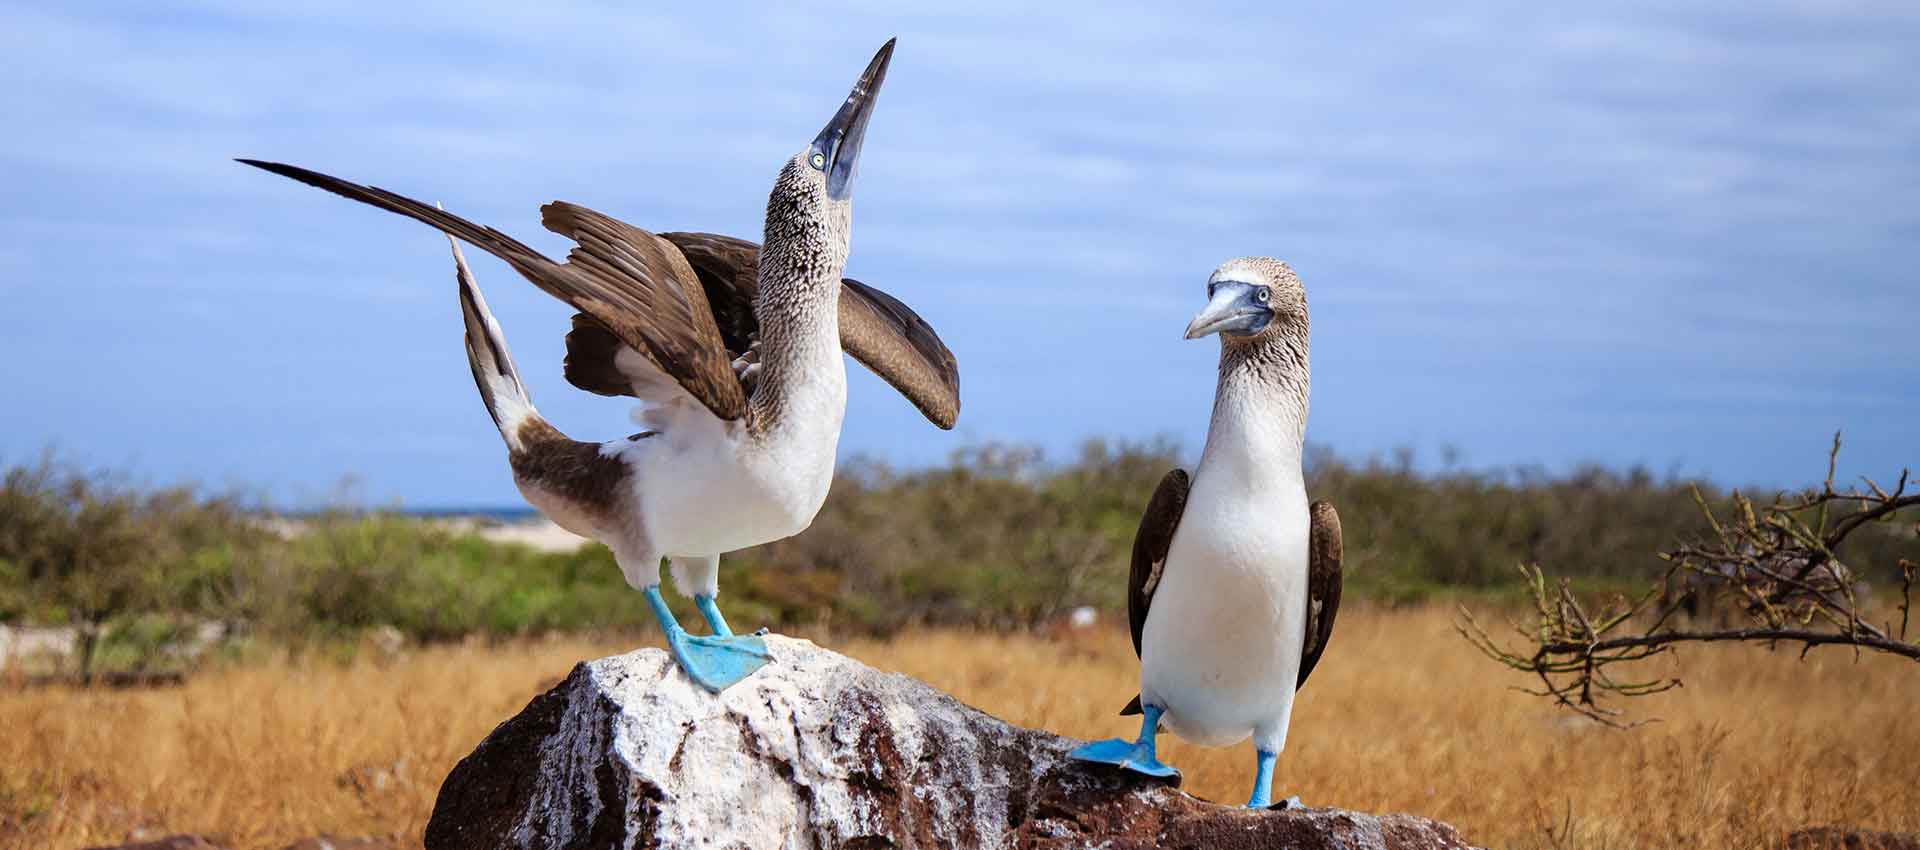 Galapagos Blue Footed Boobies